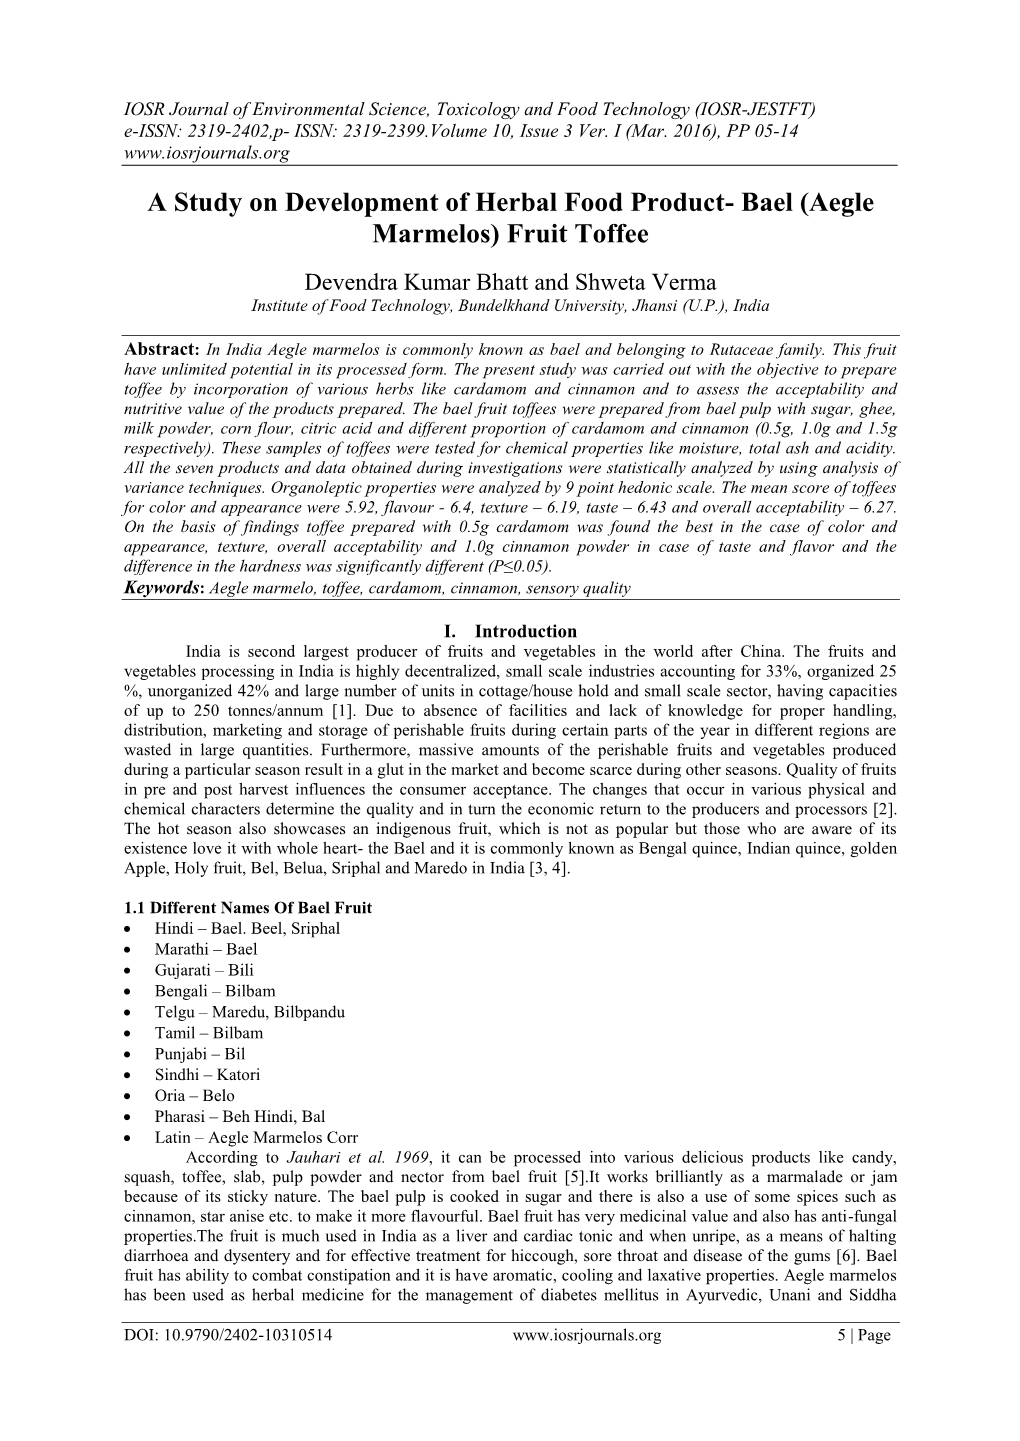 A Study on Development of Herbal Food Product- Bael (Aegle Marmelos) Fruit Toffee